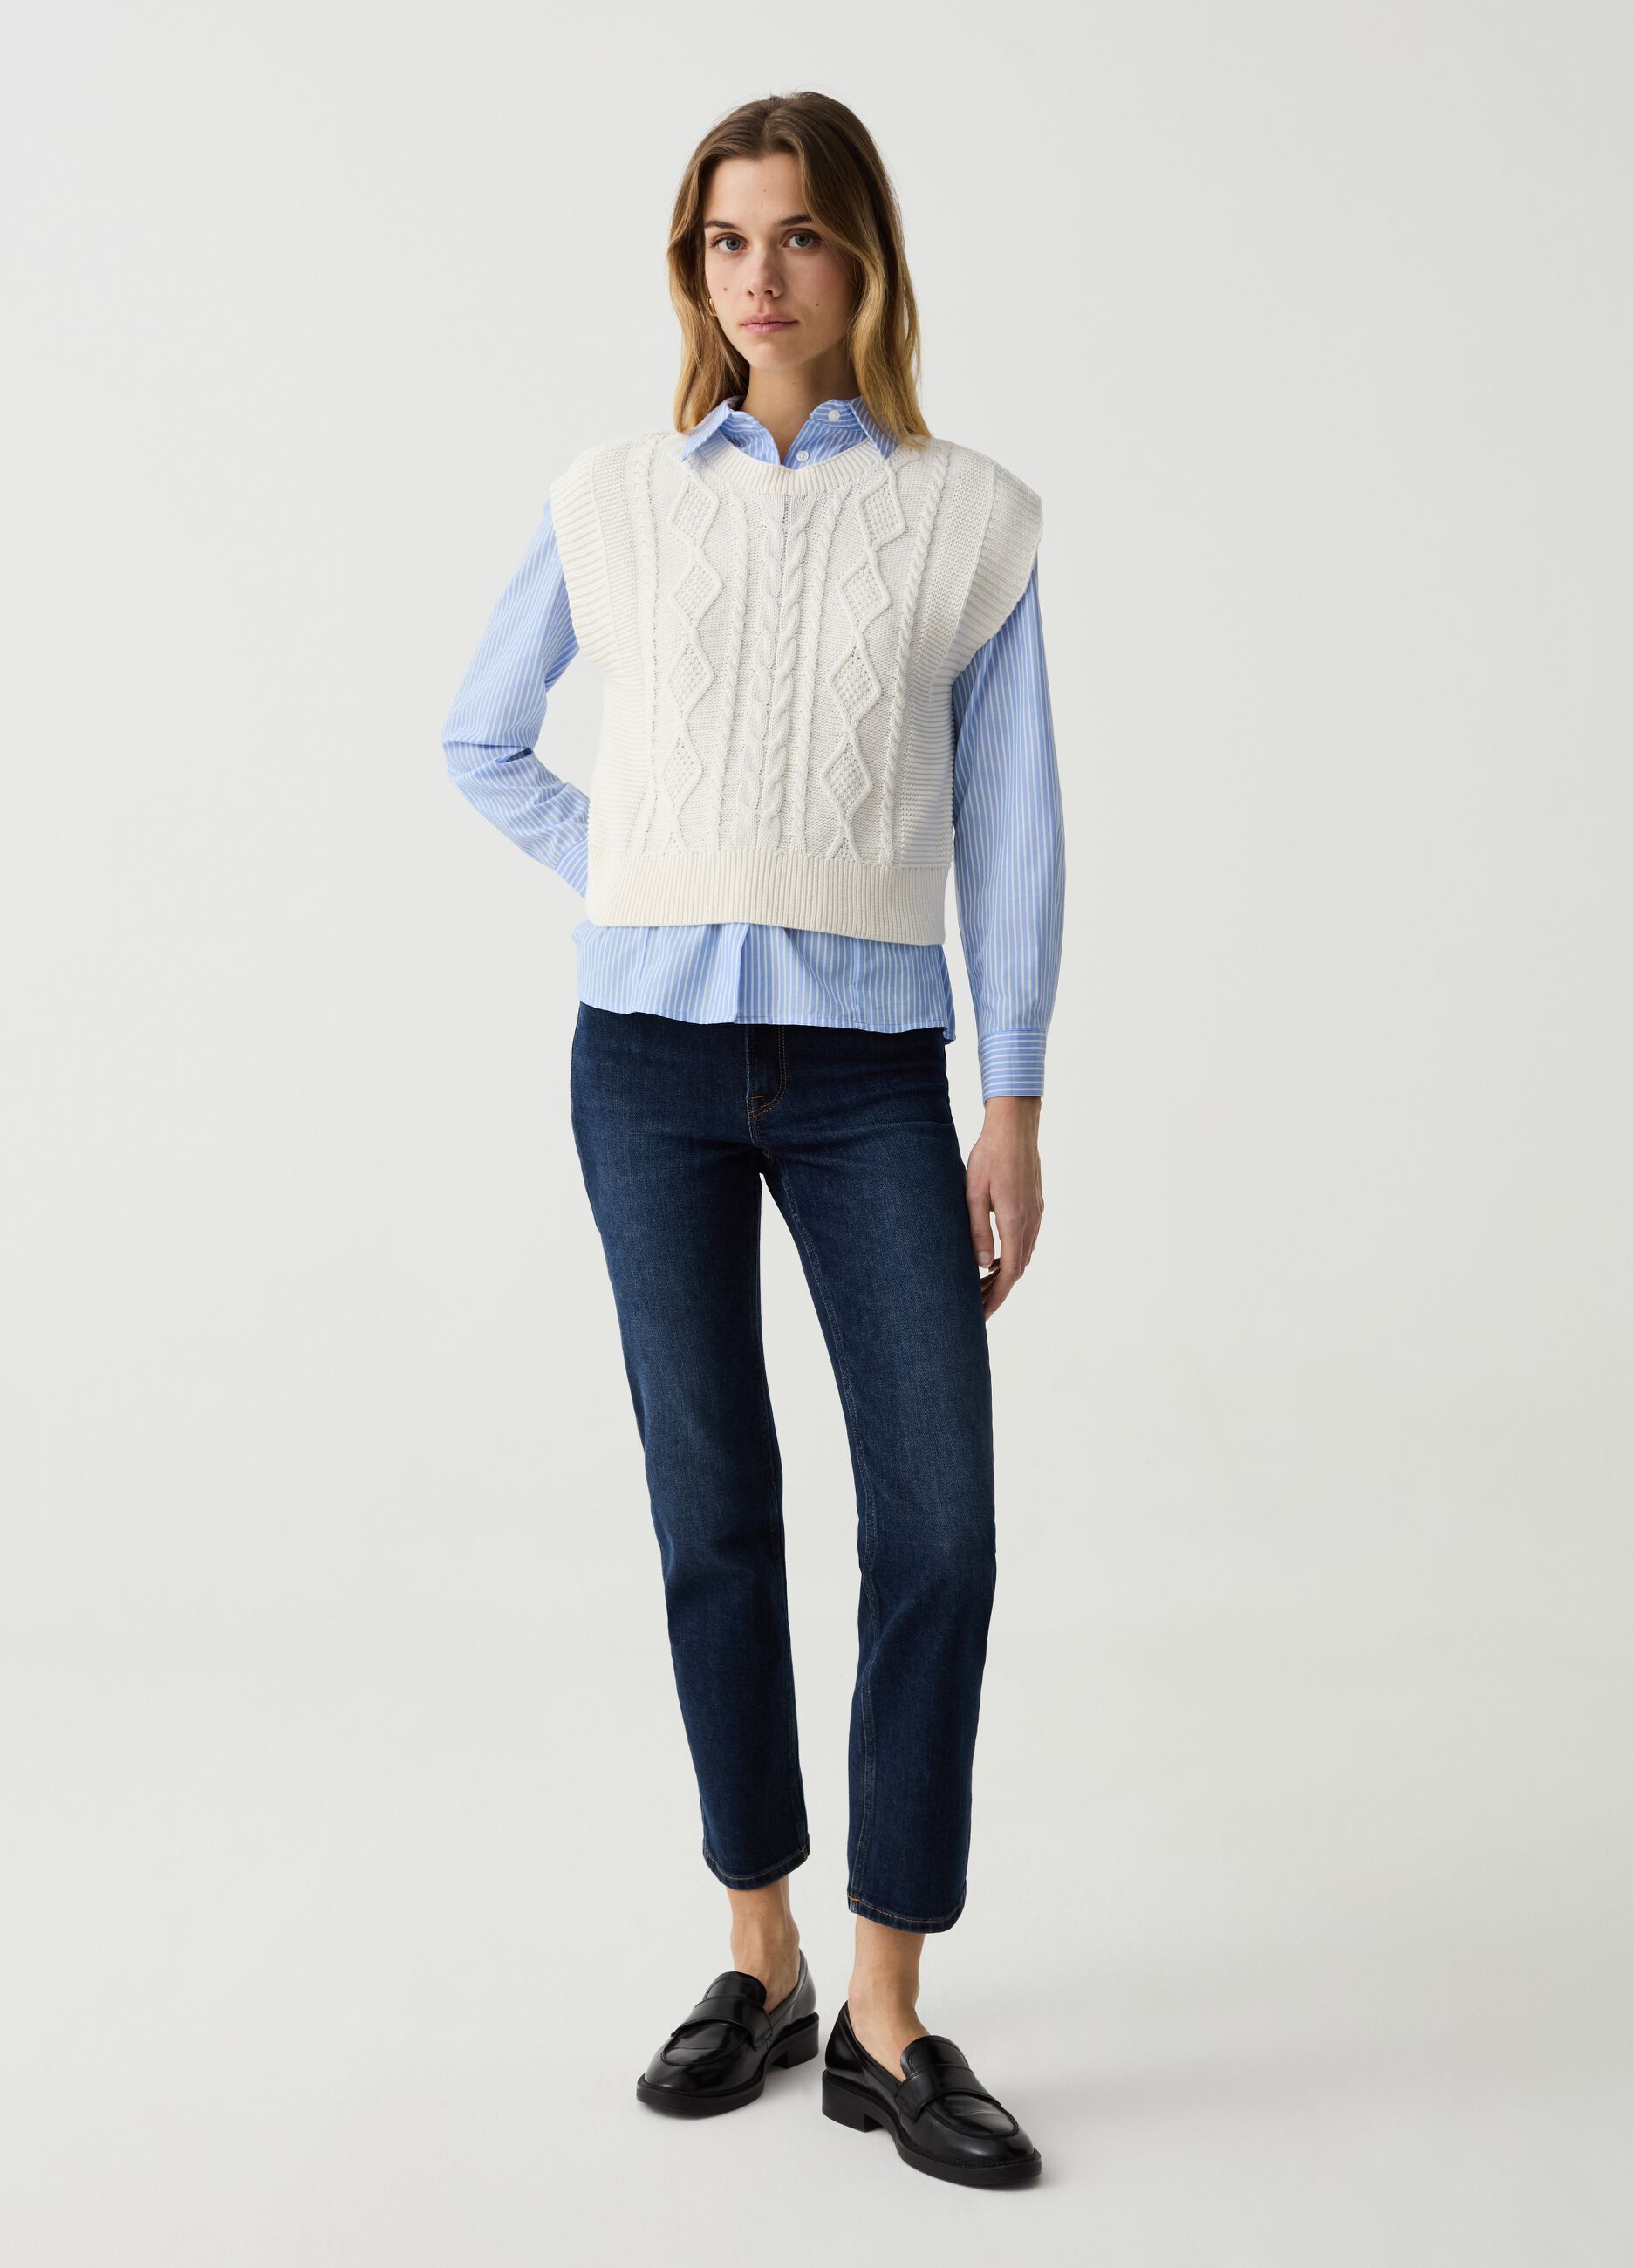 Closed gilet with cable-knit design